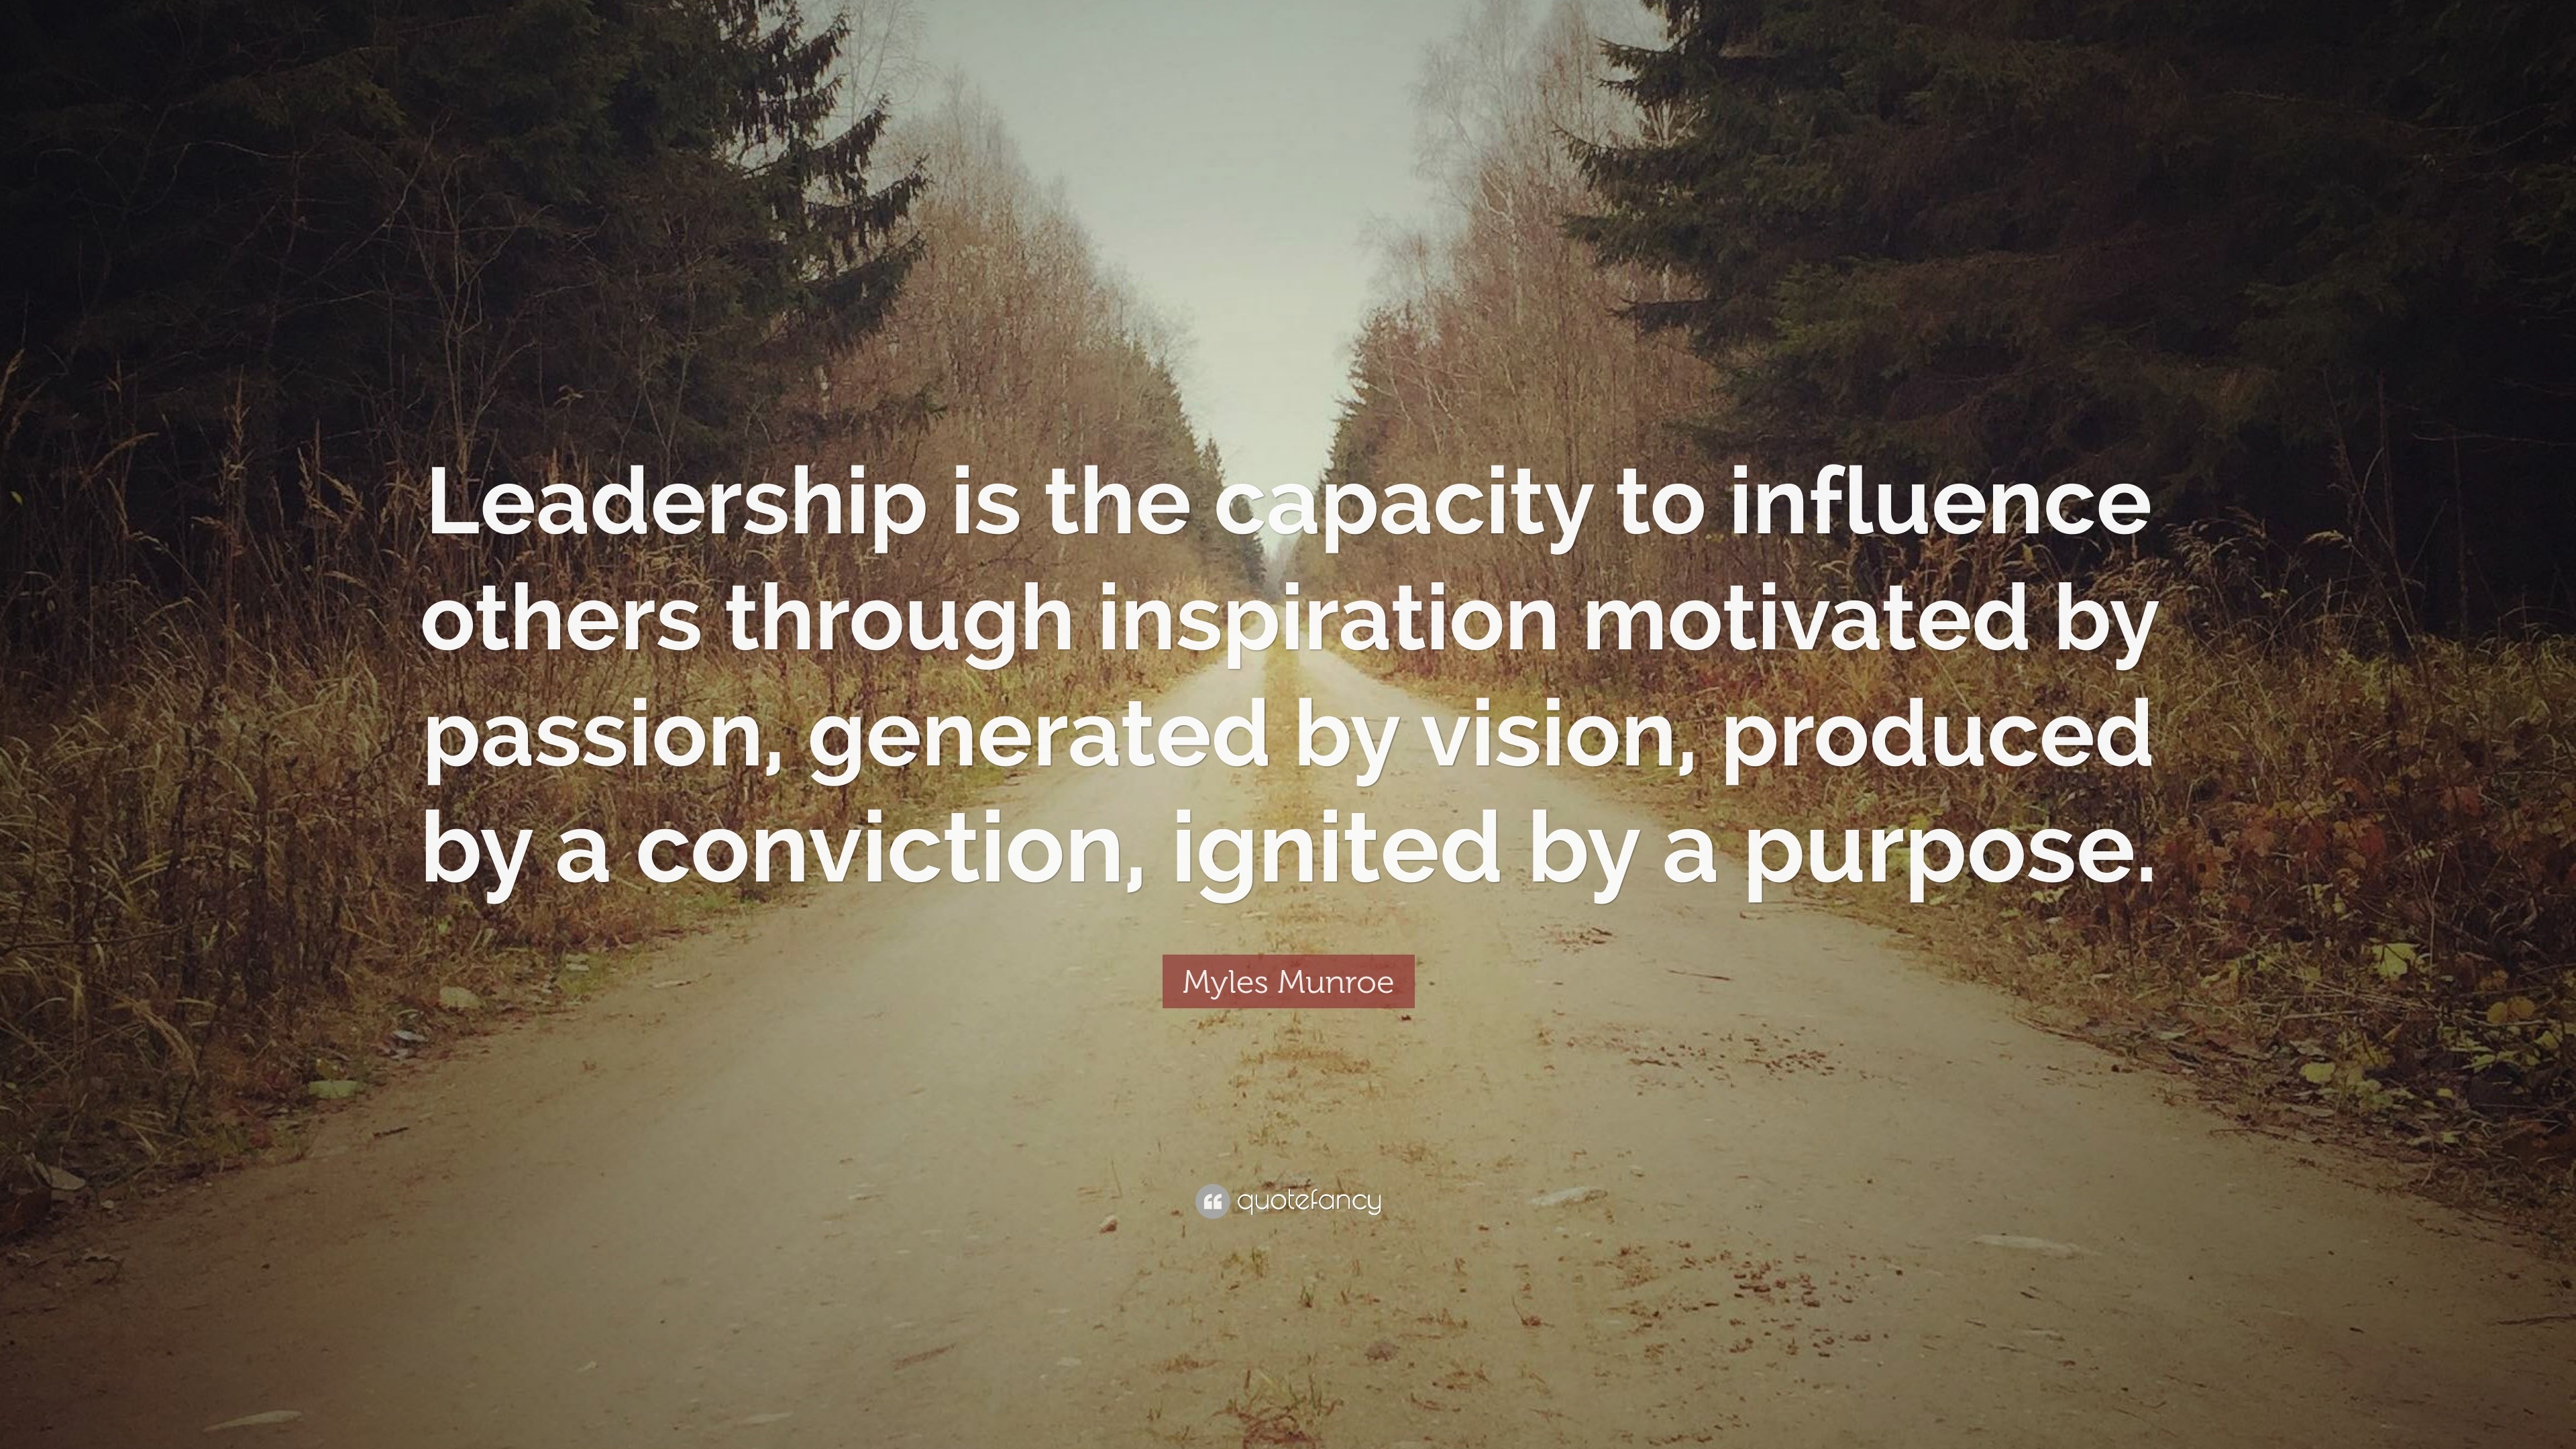 Myles Munroe Quote: “Leadership is the capacity to influence others ...